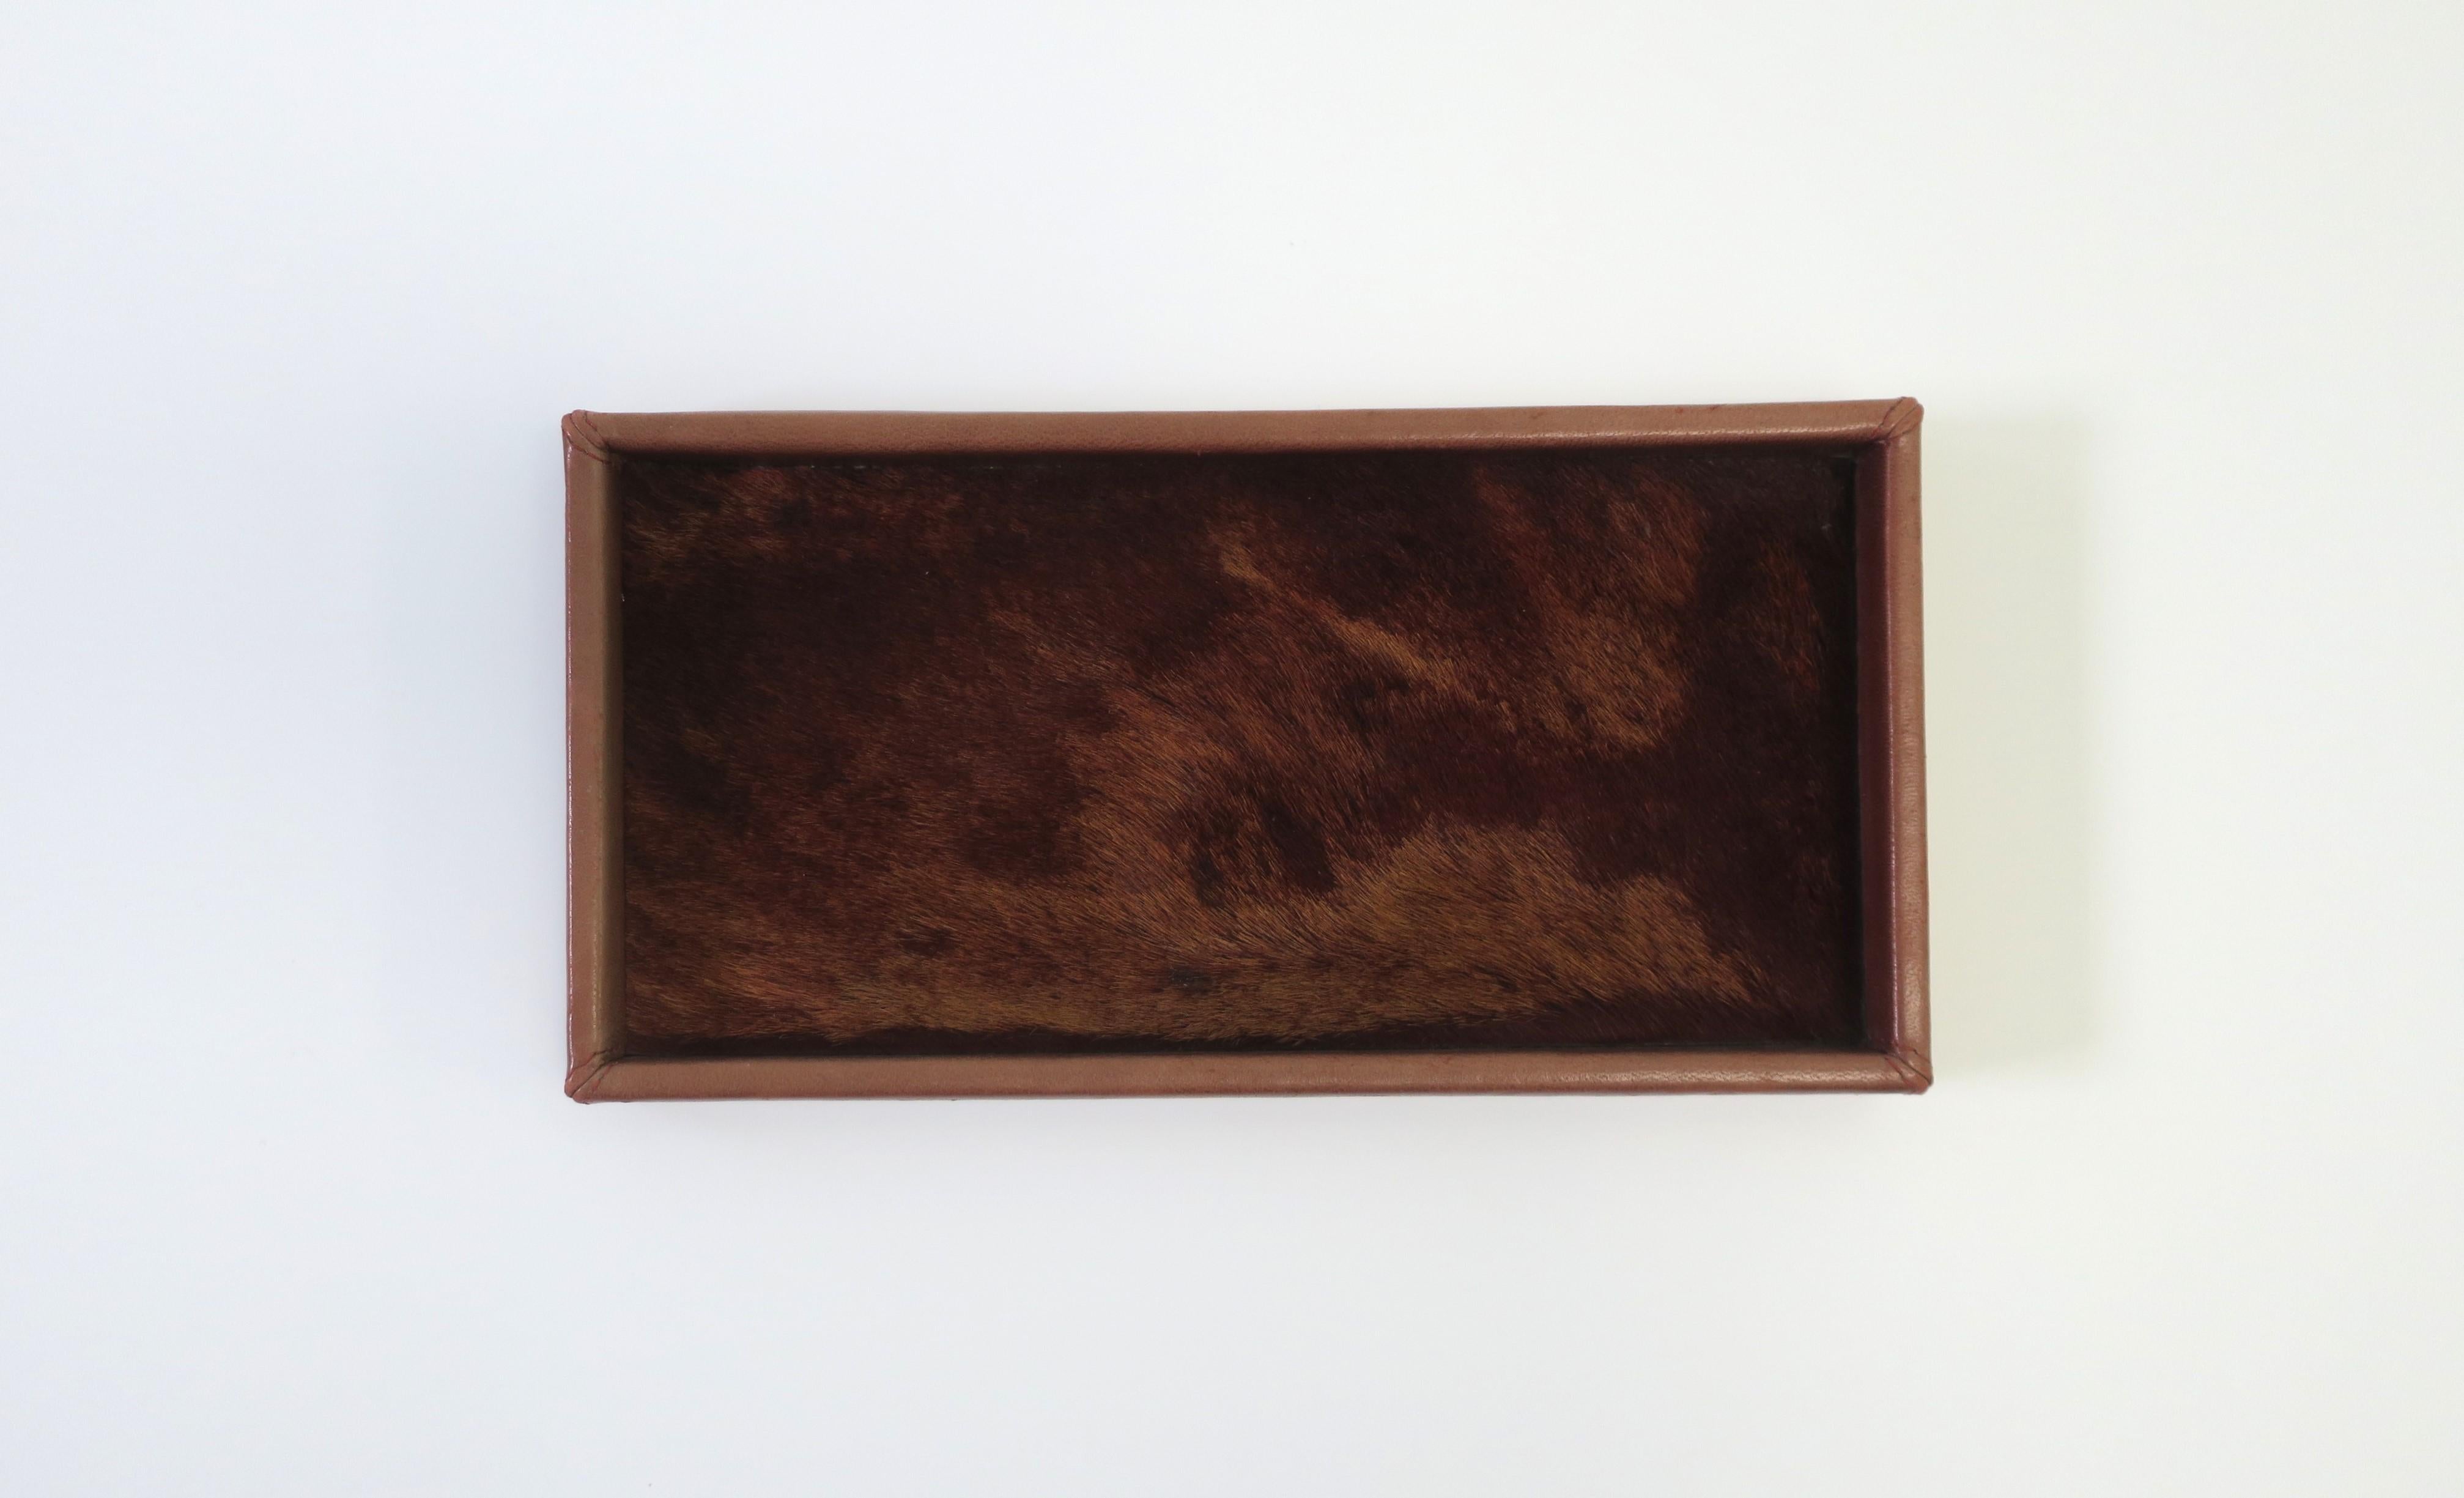 A beautiful French leather and animal hide vanity jewelry tray by designer Gilles Caffier, Paris, France. This monochromatic tray has a leather wrapped frame with a plush animal hide base. A great piece for any vanity, nightstand table, dresser,